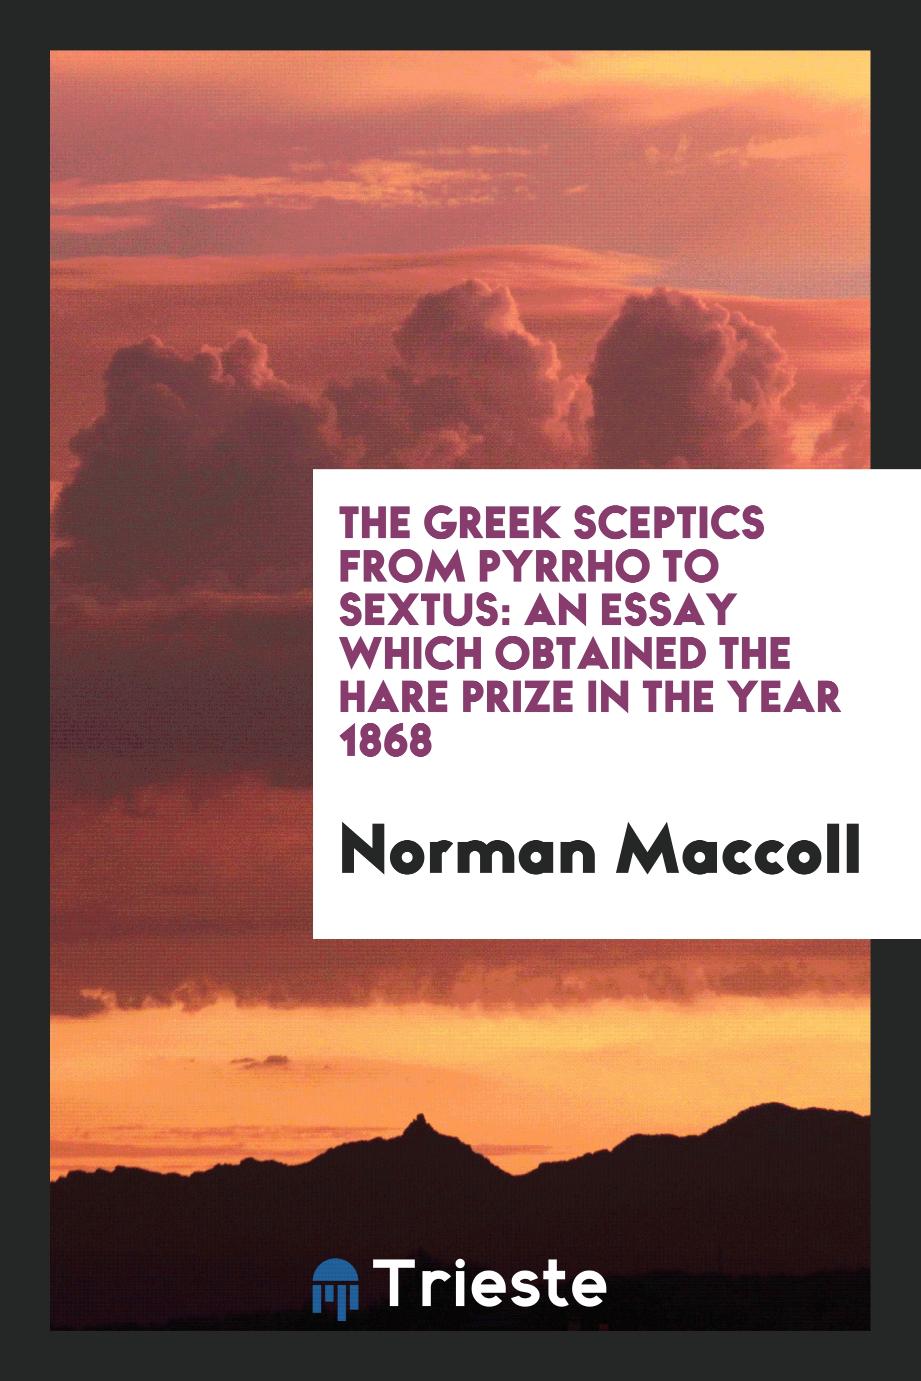 The Greek Sceptics from Pyrrho to Sextus: An Essay Which Obtained the Hare Prize in the Year 1868